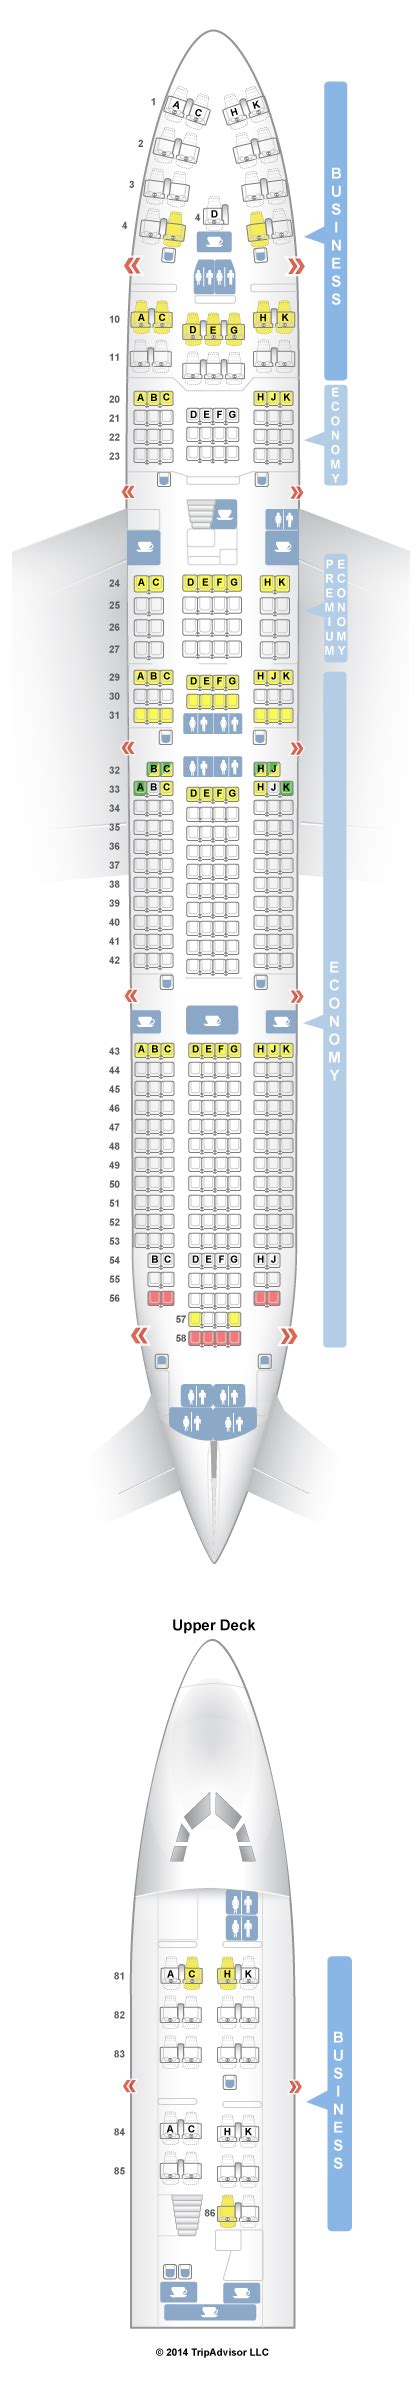 Boeing 747-400; Lufthansa fleet; Main content. Boeing 747-400. Seat maps Boeing B747-400i. Sample illustration B747-400 (67 Business / 32 Premium Economy / 272 Economy) Main deck. Upper deck. All the configurations of the Boeing B747-400 for you to download.. 